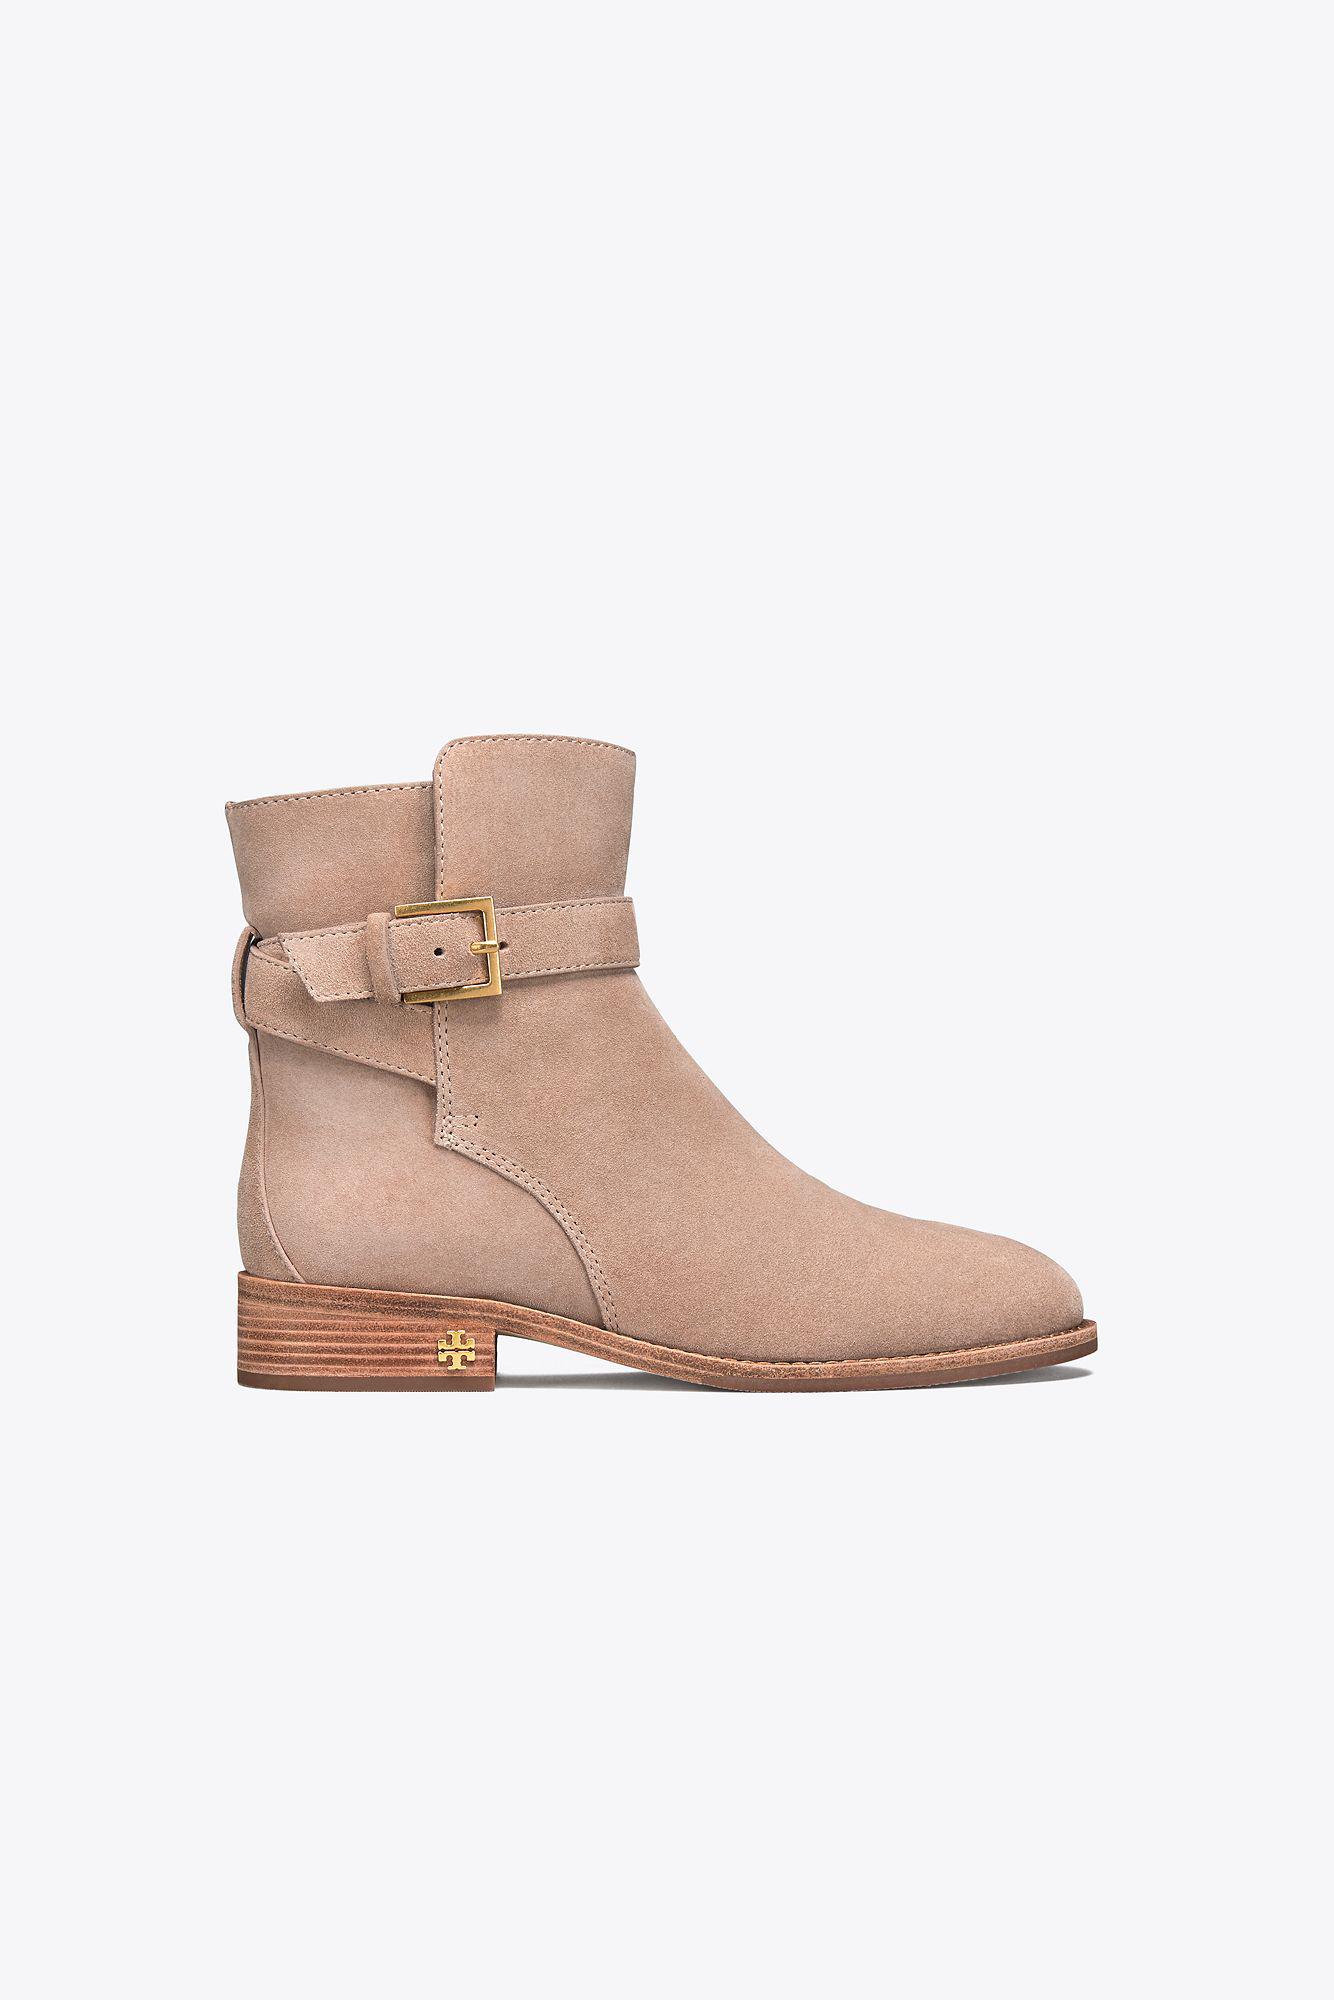 Tory Burch Brooke Ankle Bootie in Natural | Lyst Canada